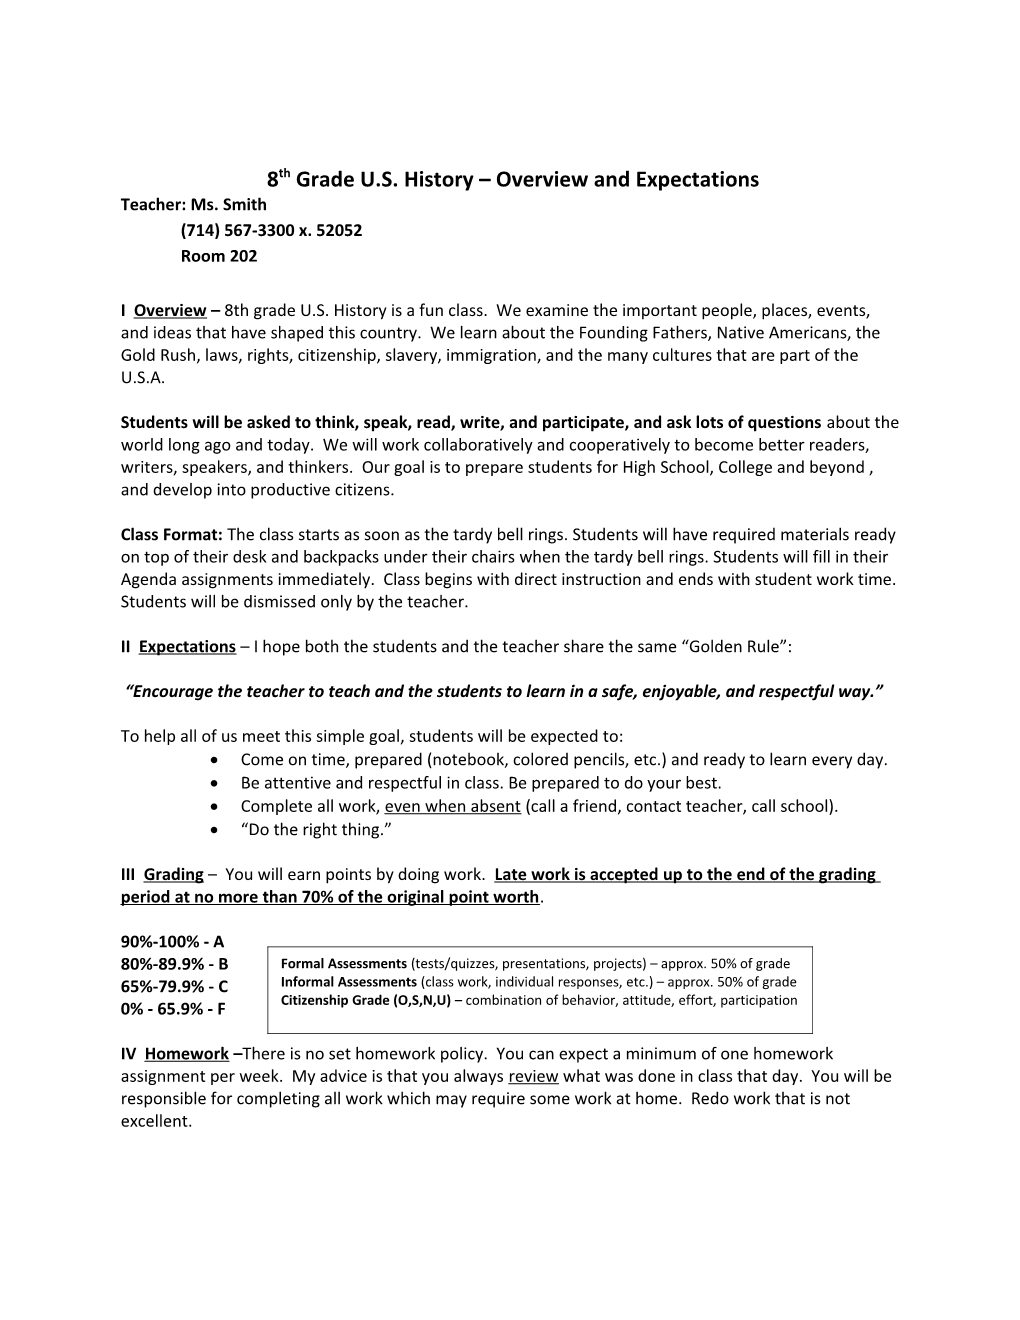 8Th Grade U.S.History Overview and Expectations